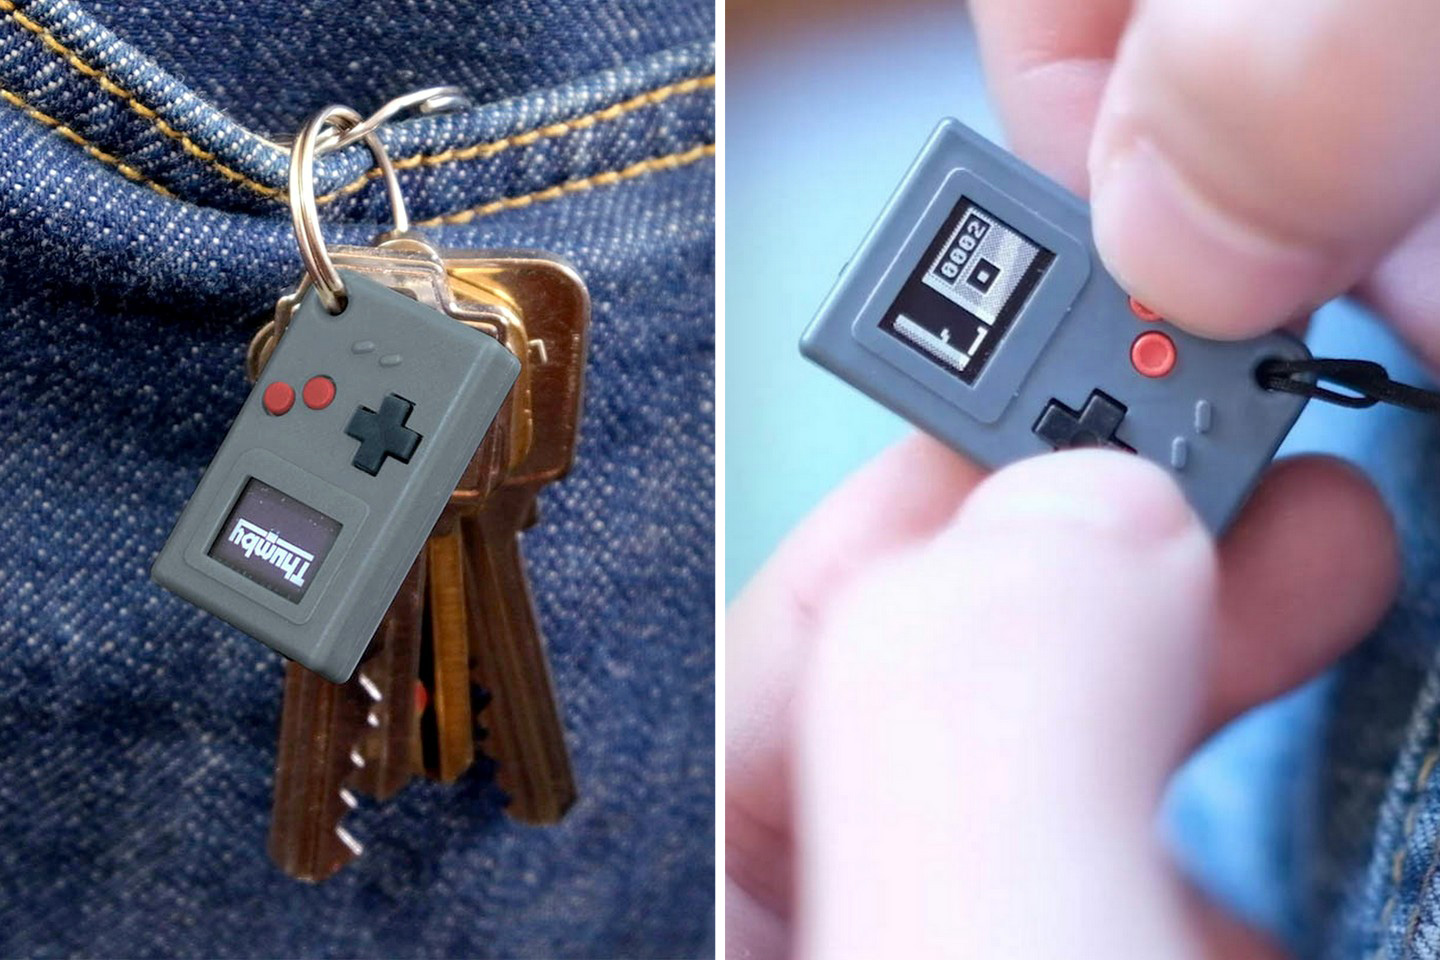 #The ‘World’s Smallest Game Boy’ is tiny enough to fit on your keychain, and it actually plays games